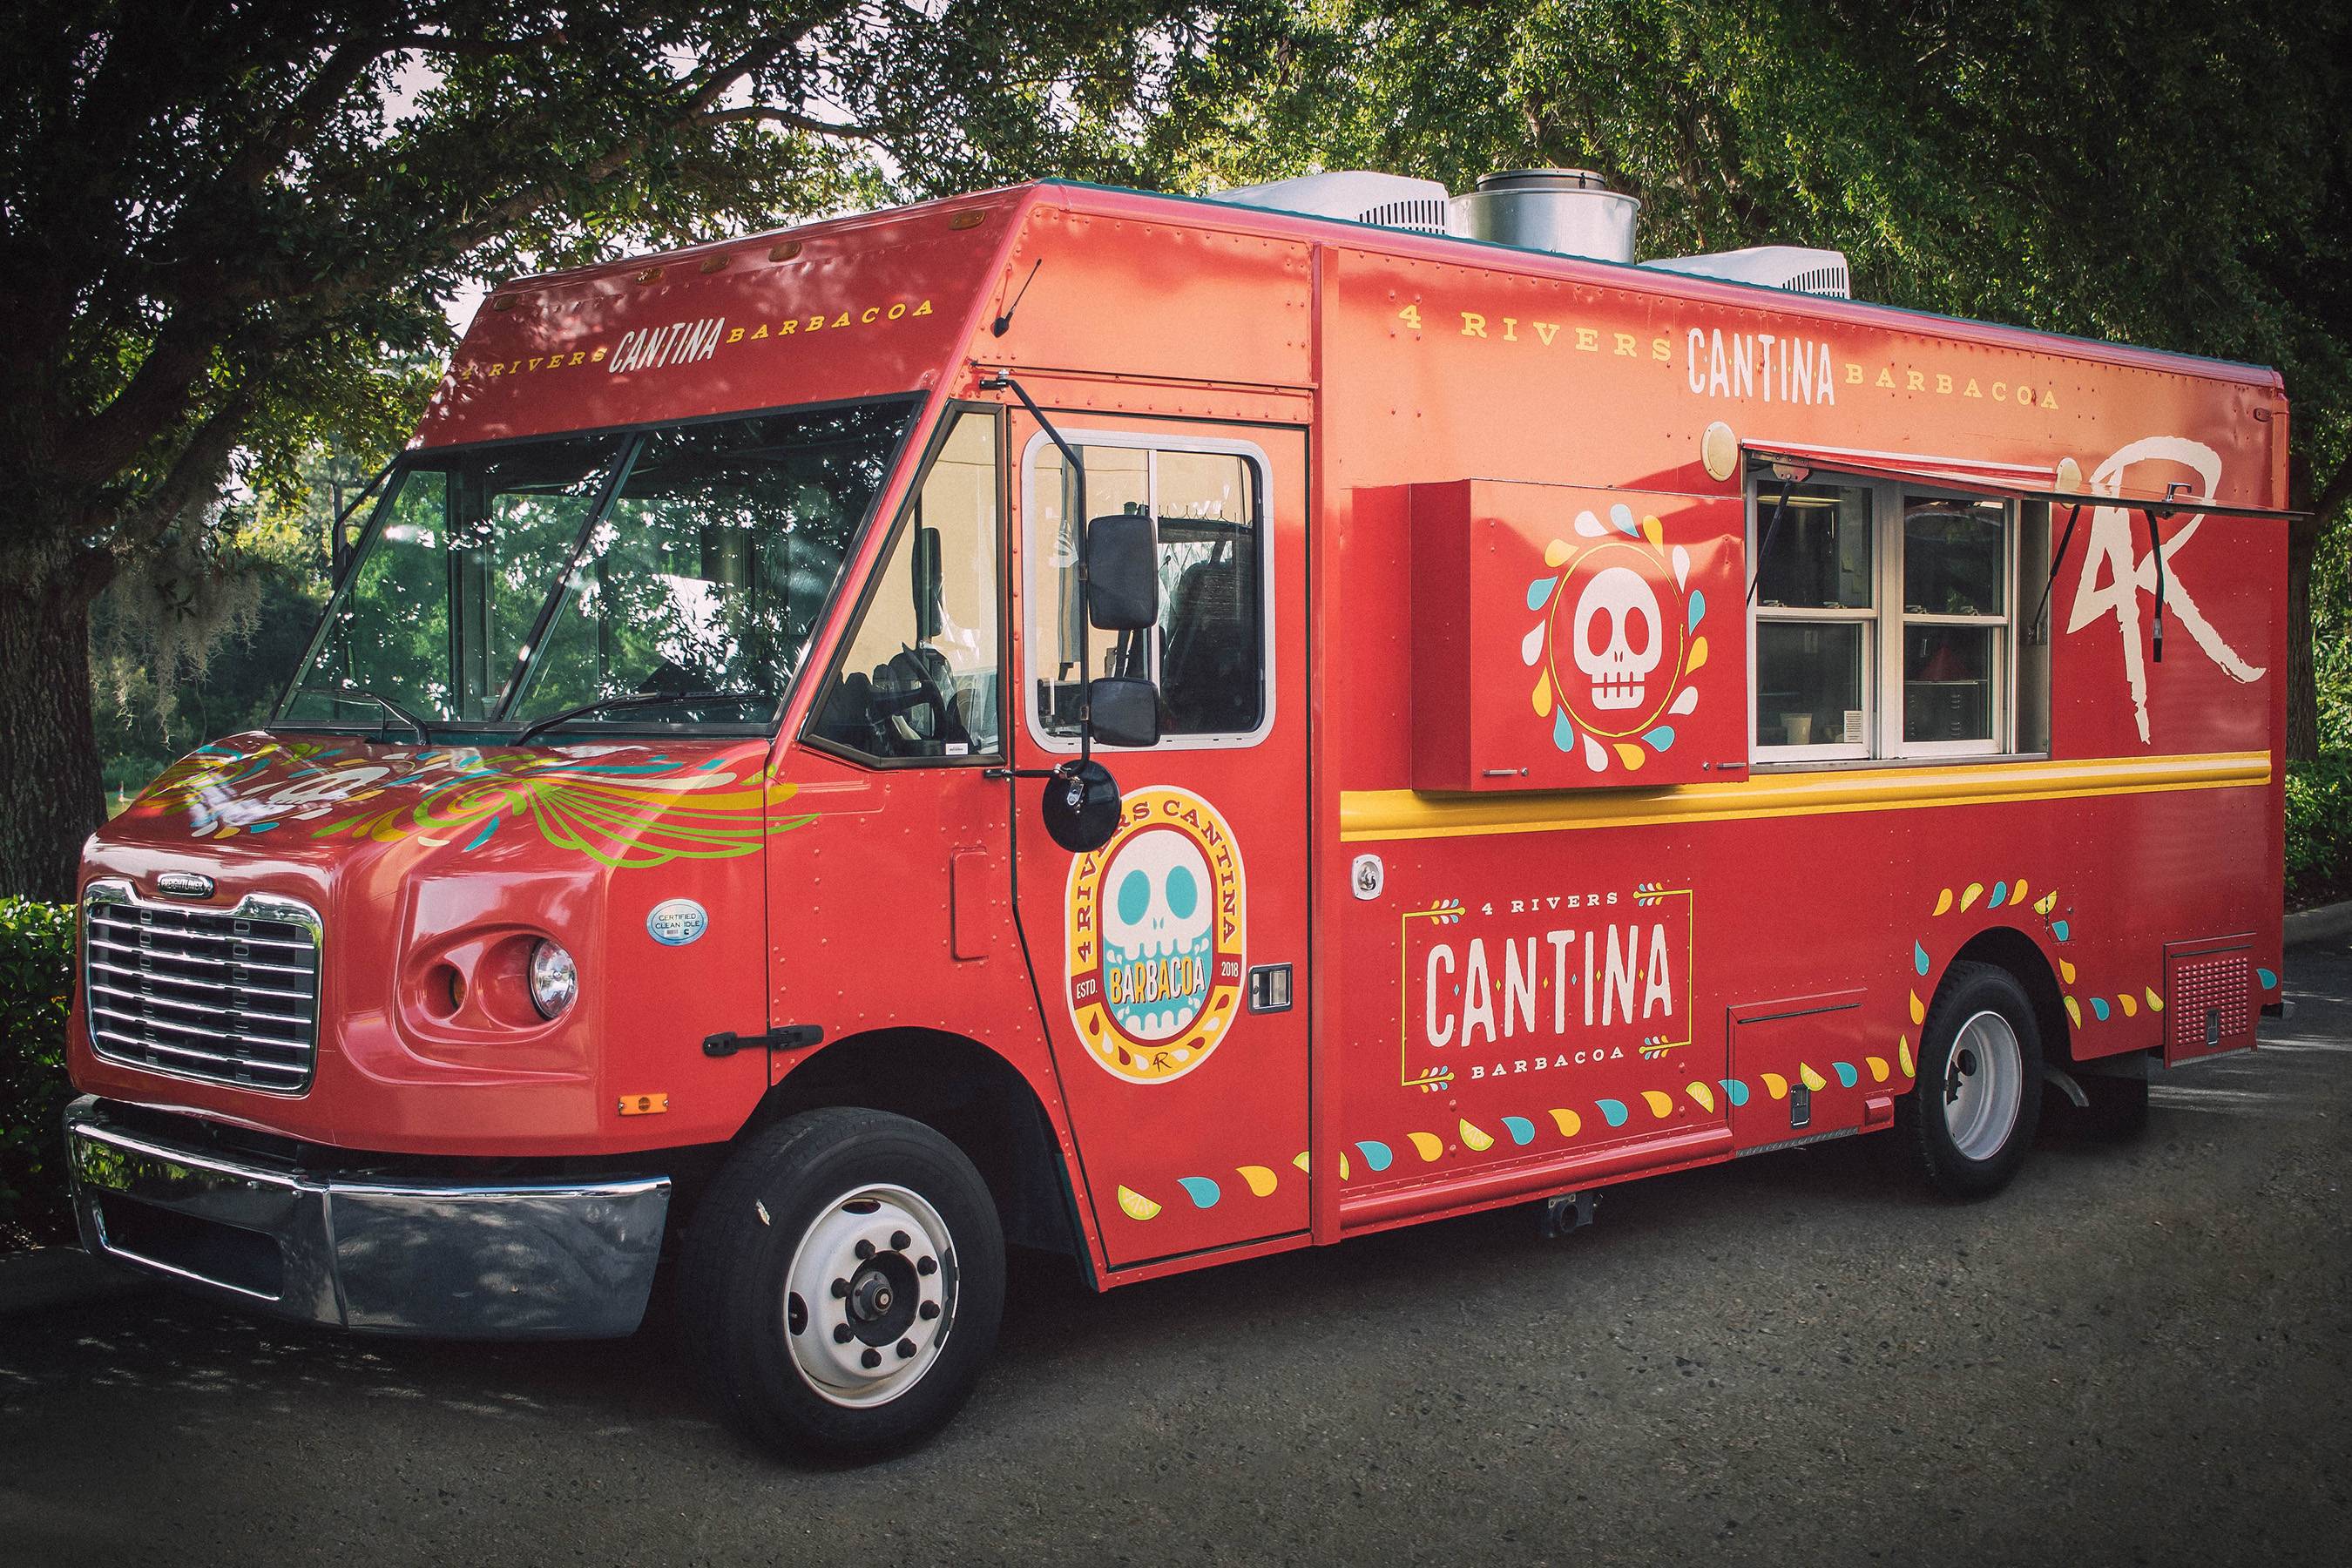 4R Cantina Barbacoa Food Truck overview